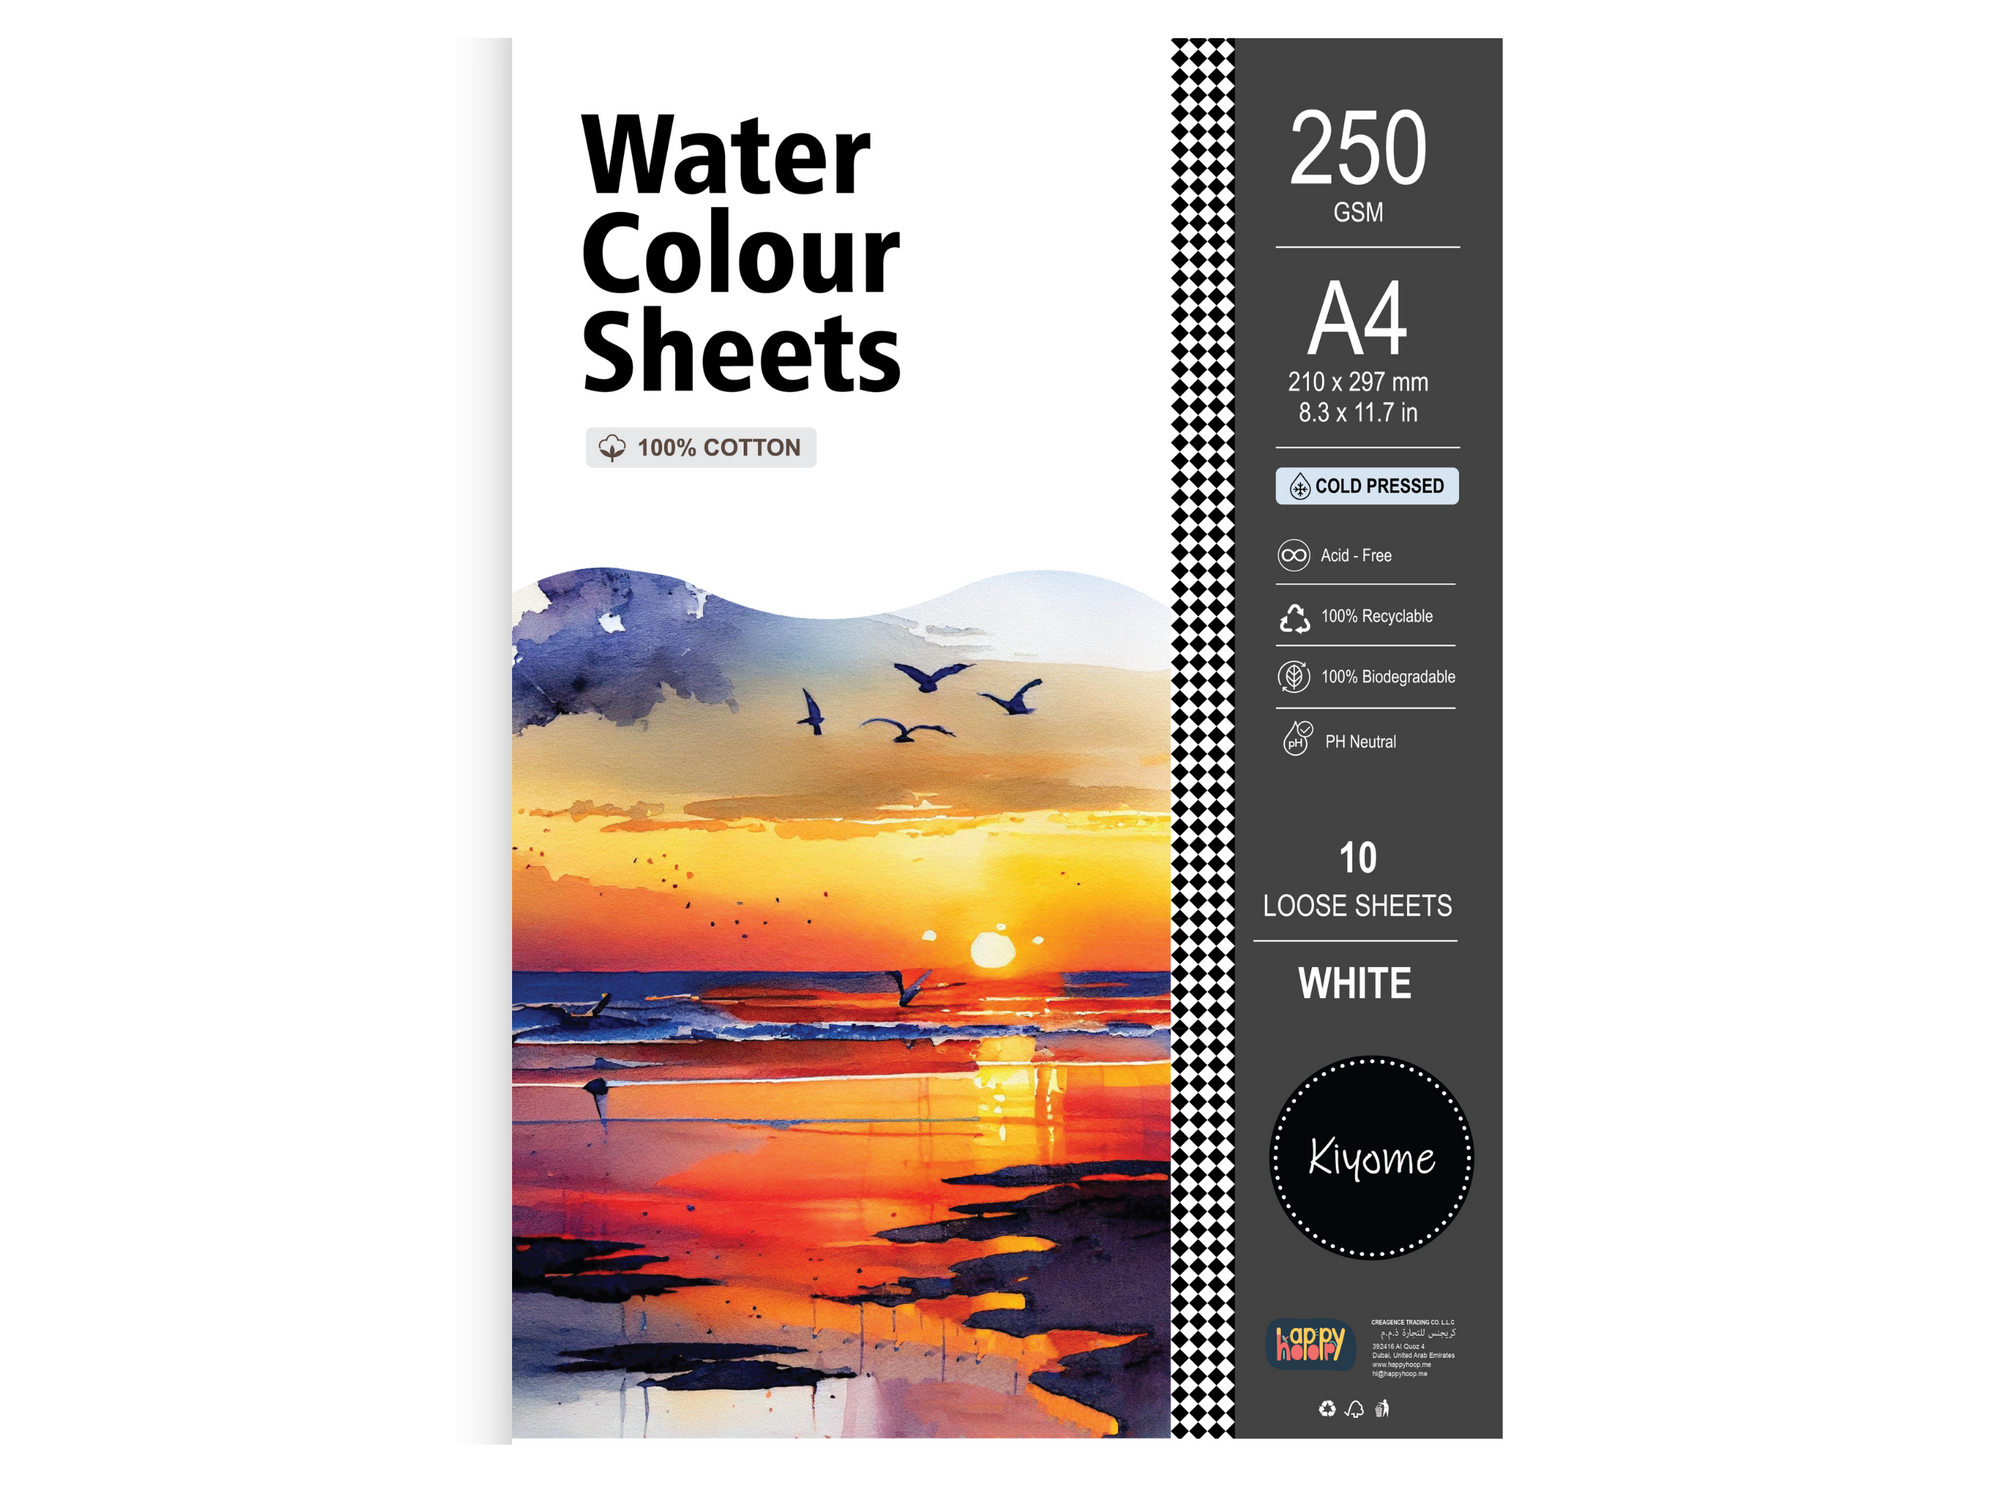 Kiyome 100% Cotton Watercolour Sheets | Cold Pressed | 250 GSM | A4 | 10 Sheets